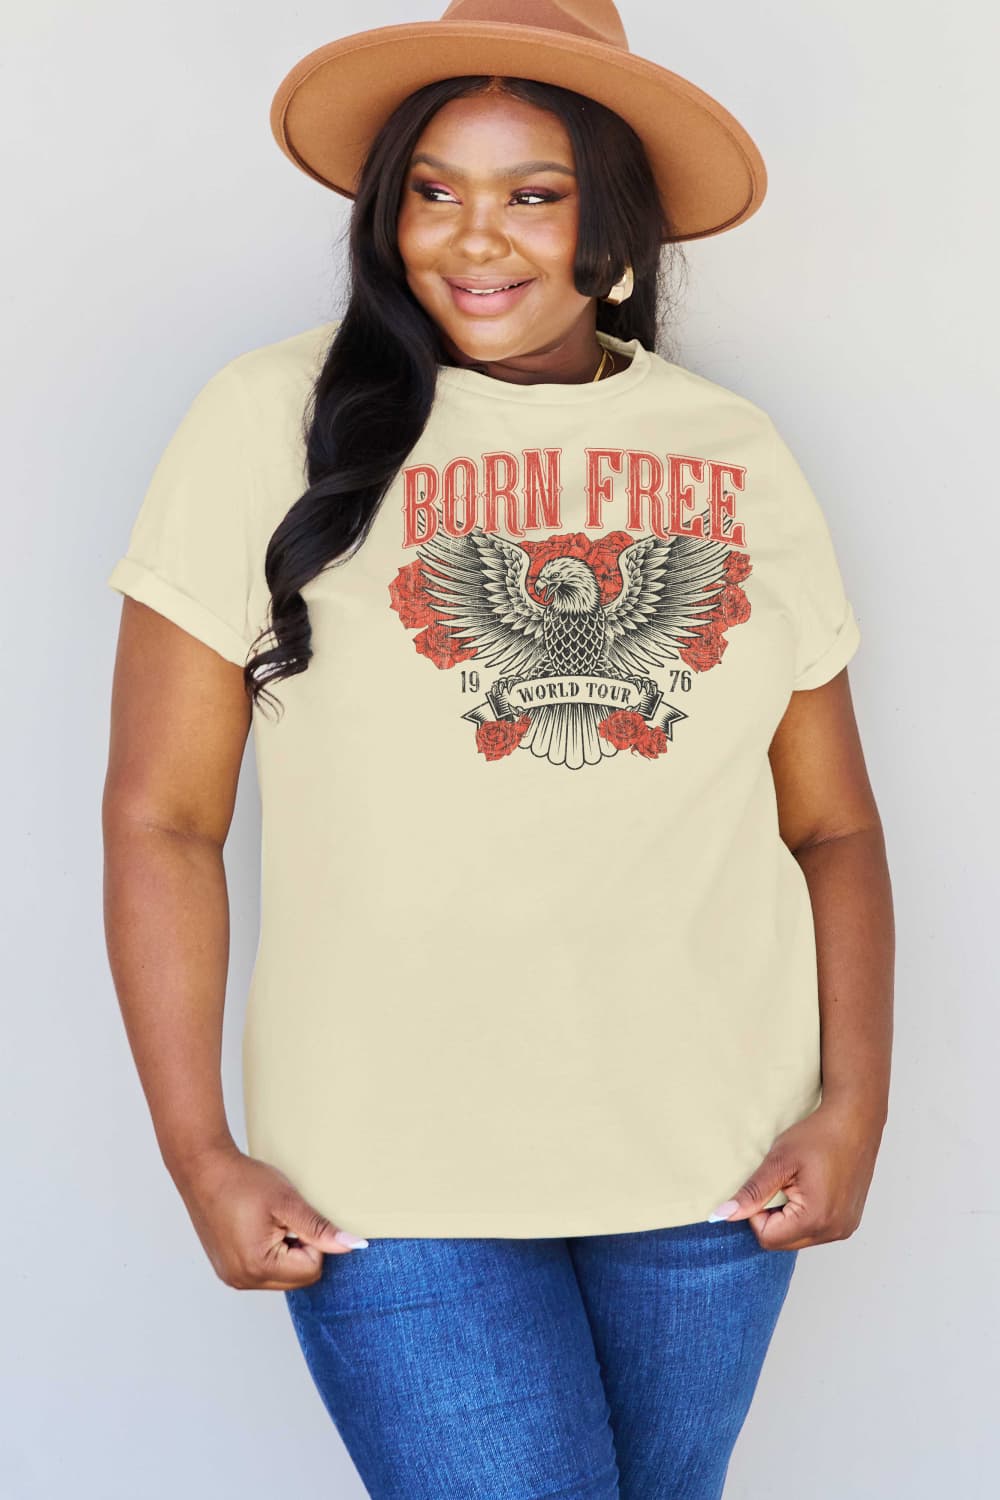 Simply Love Full Size BORN FREE 1976 WORLD TOUR Graphic Cotton T-Shirt